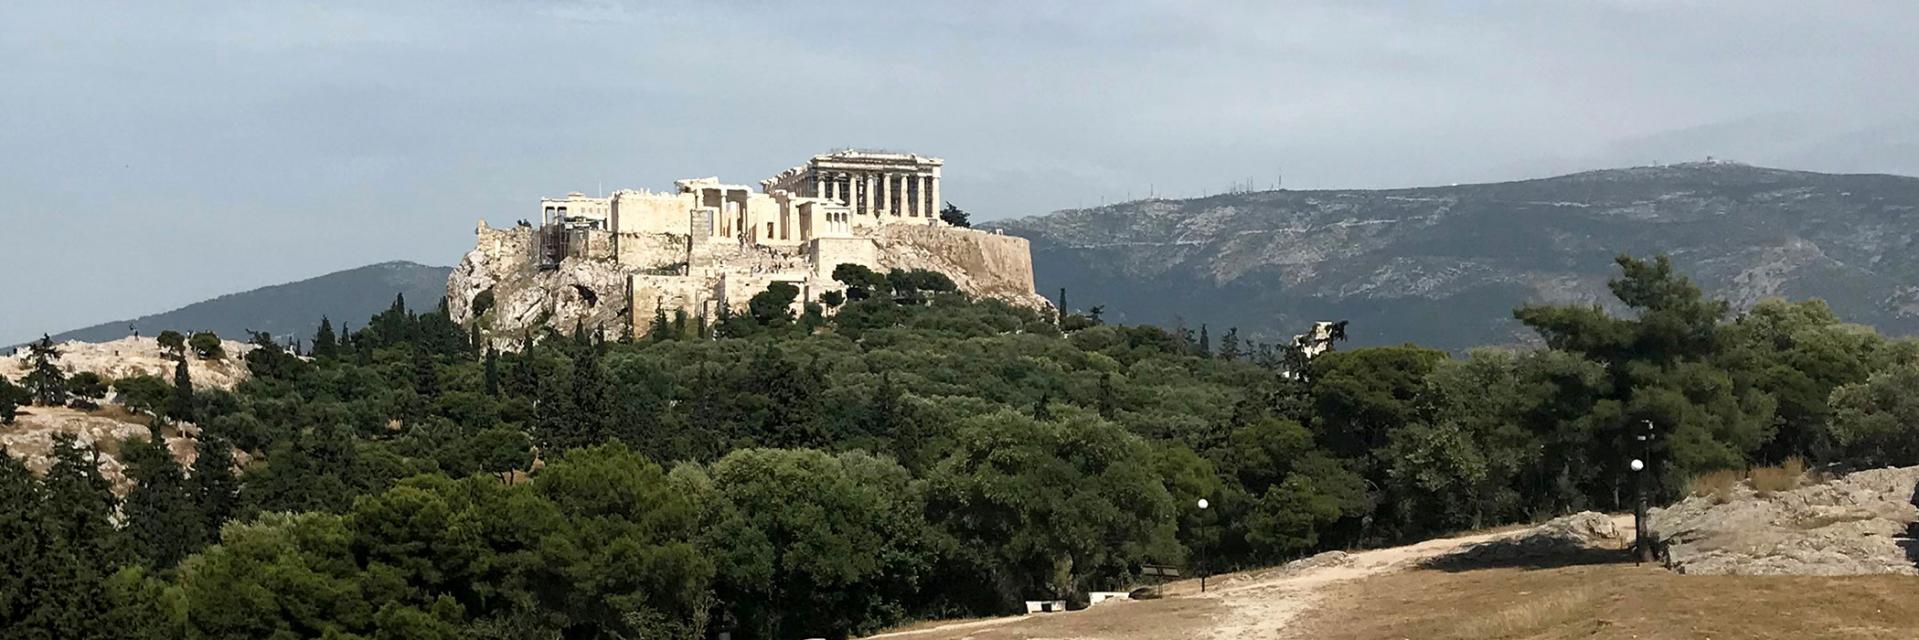 Acropolis on top of the hill seen from the agora